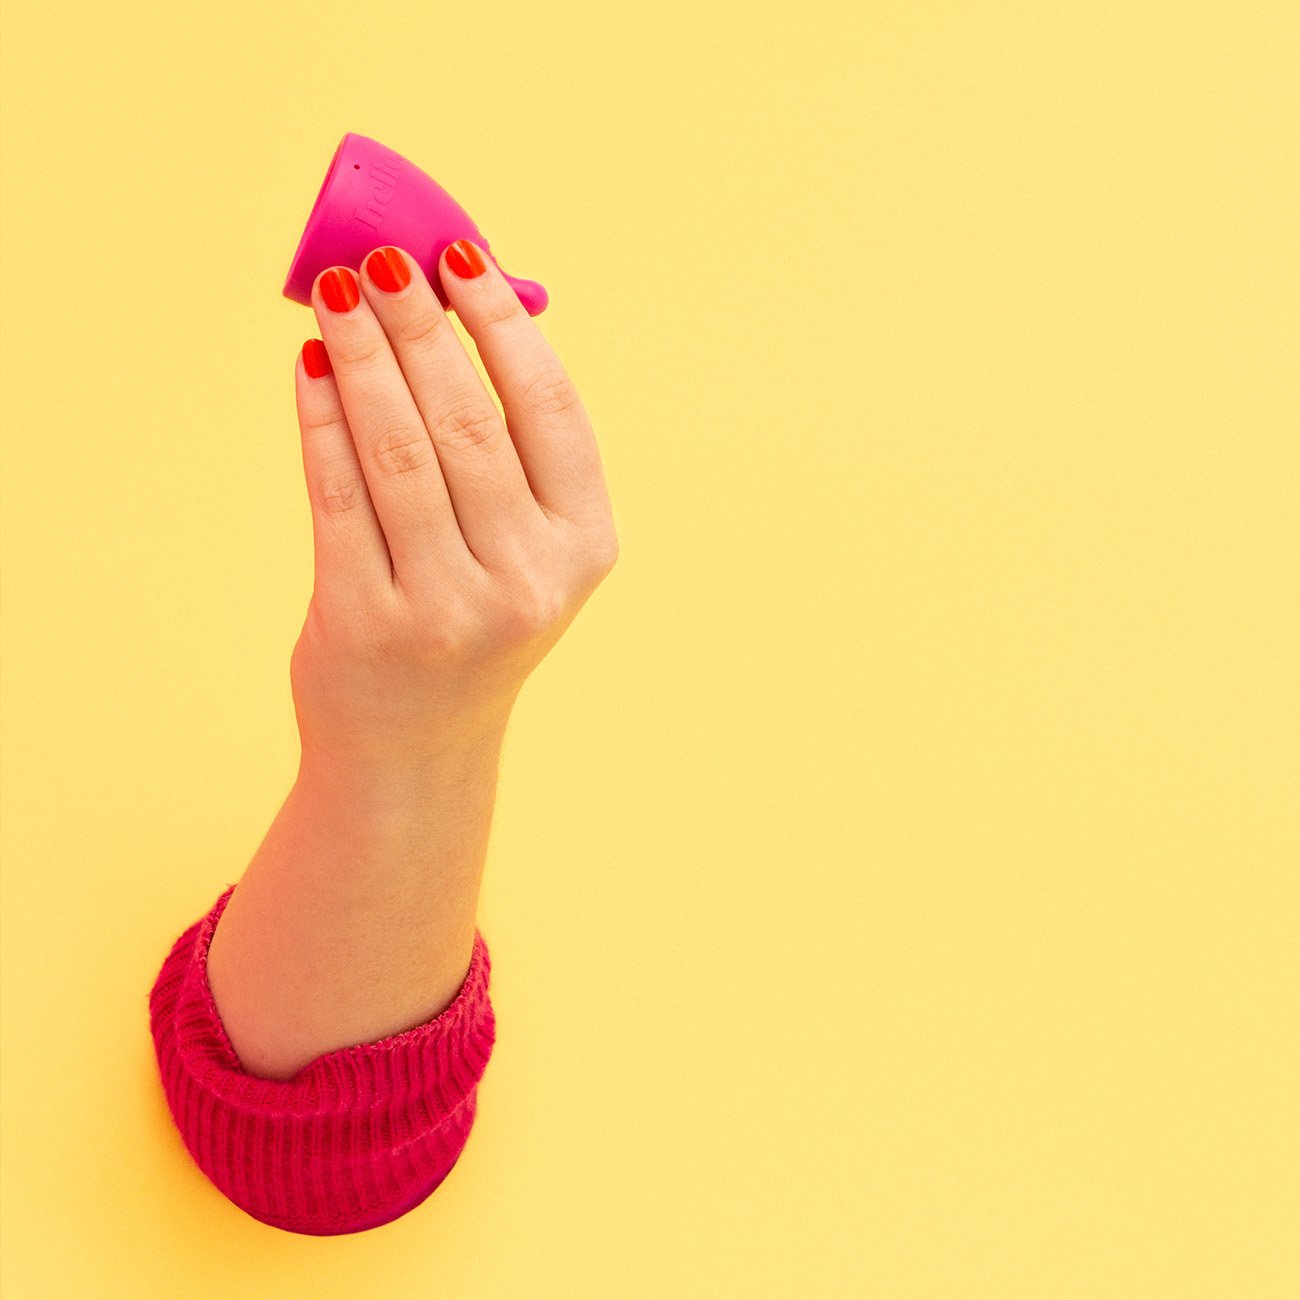 5 Reasons Why Gen Z is Ready to Embrace the Menstrual Cup